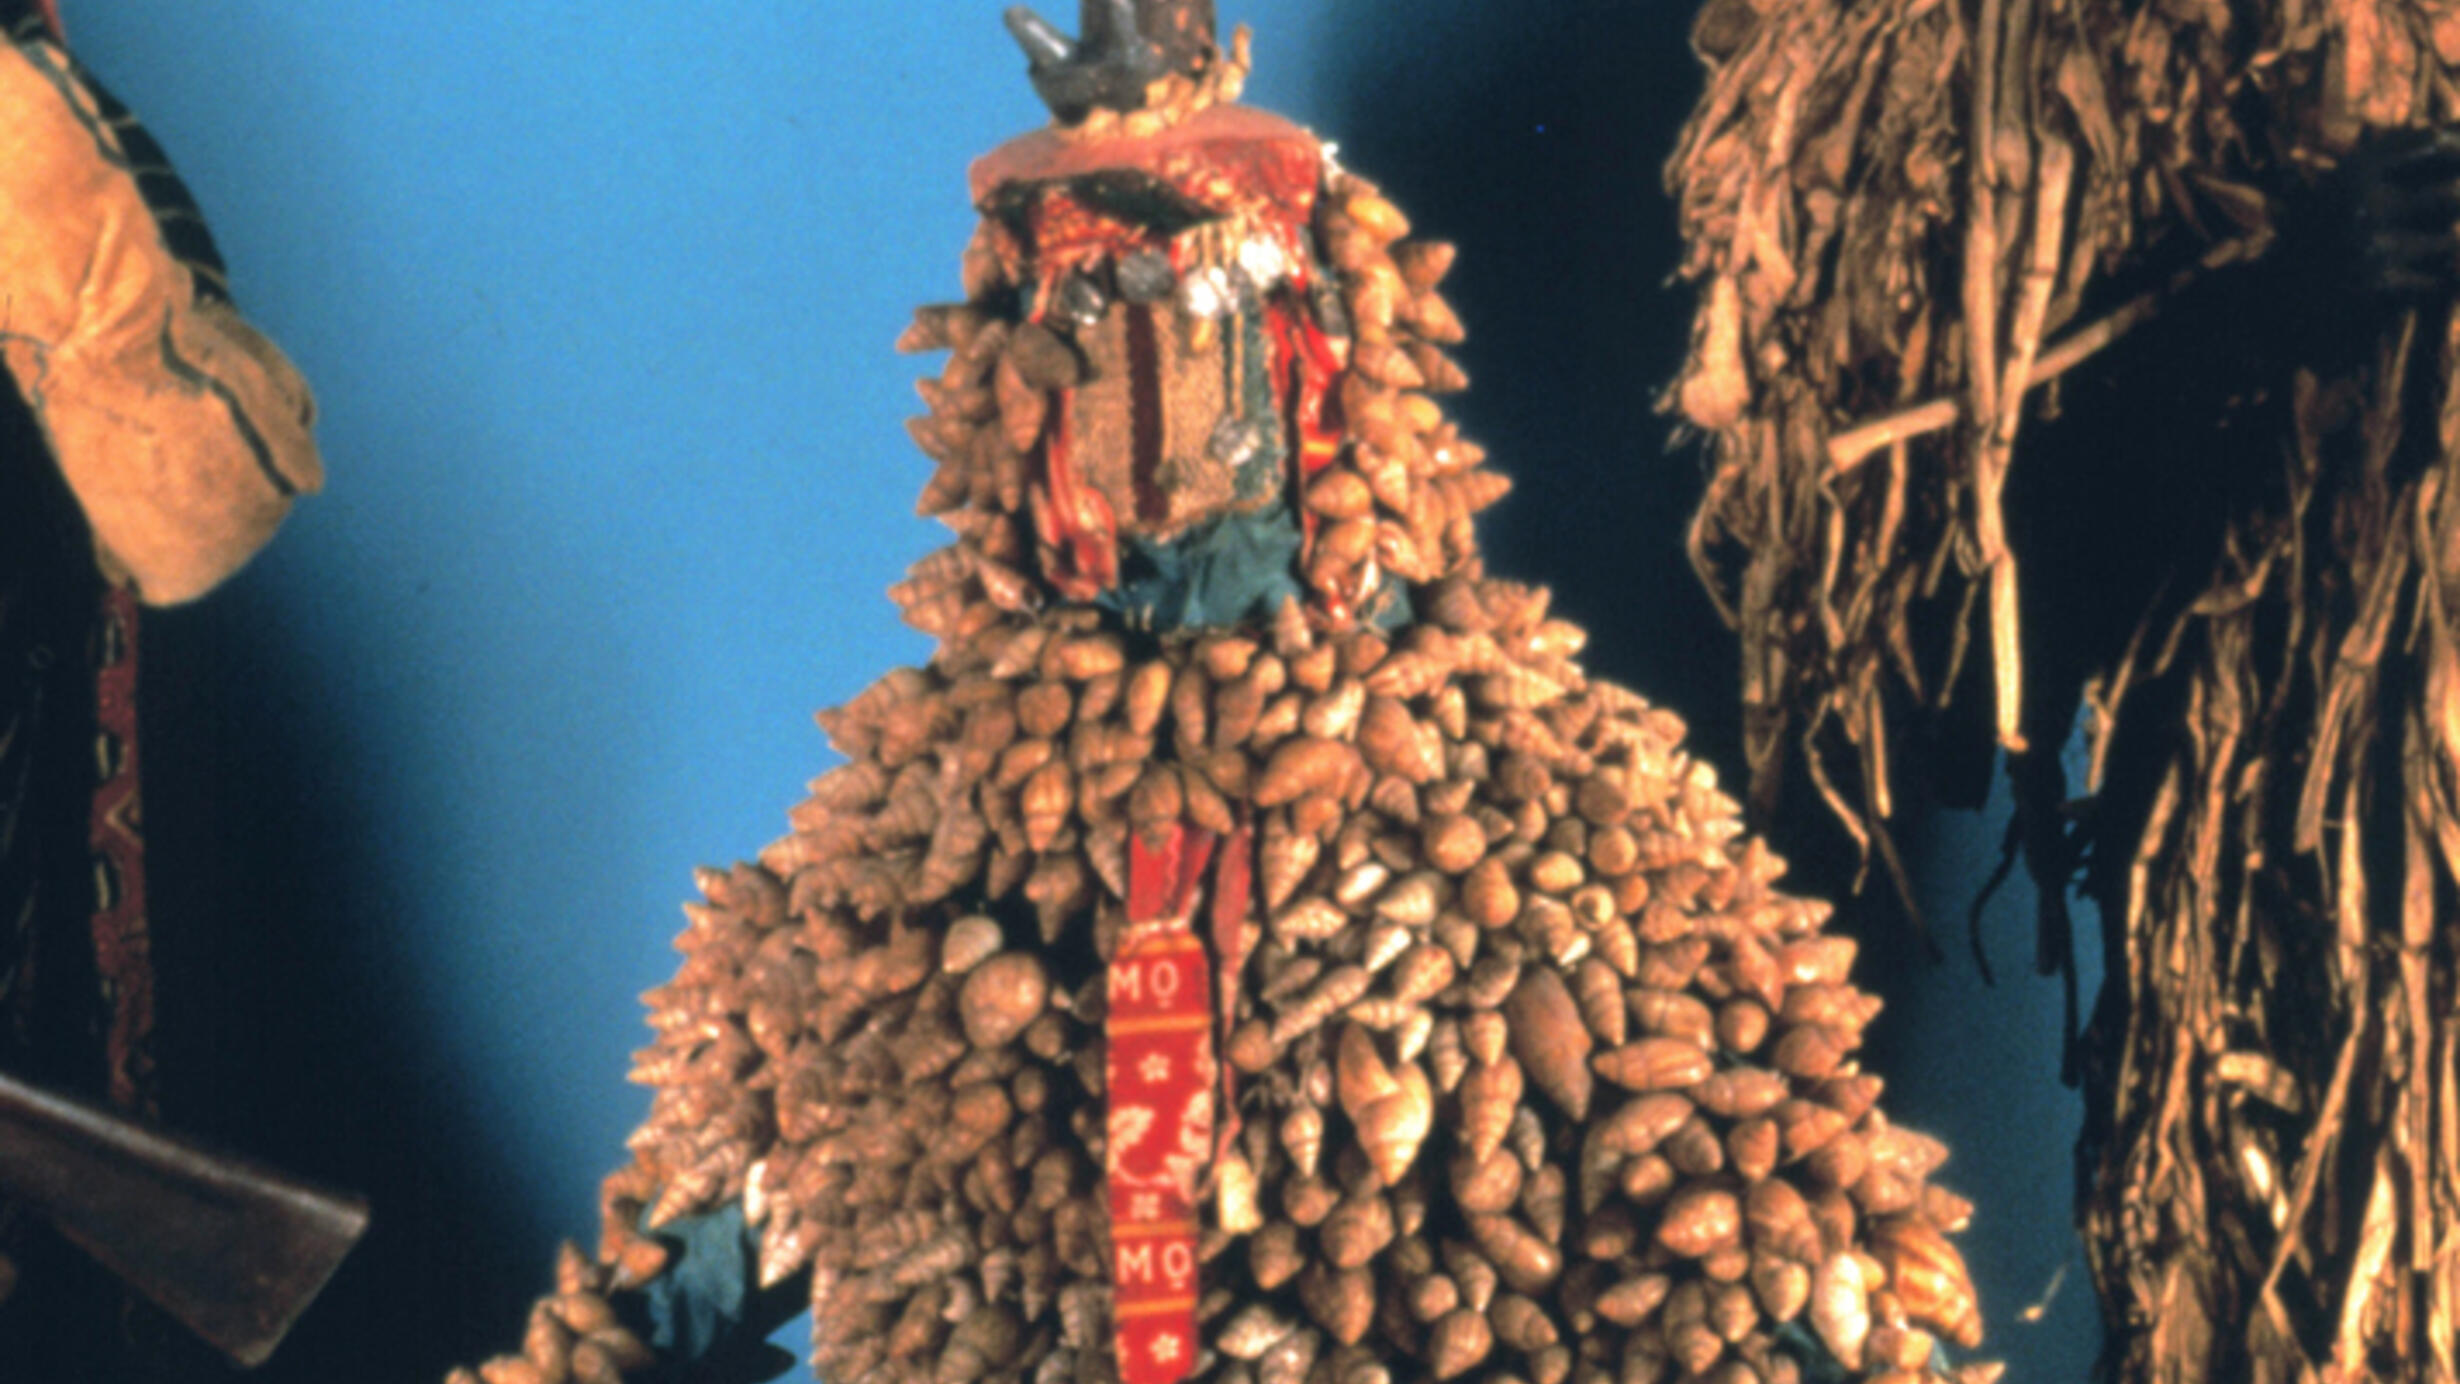 From the Yoruba people of Nigeria, in the Museum’s Hall of African Peoples, an ornate full-body costume used in the Egungun masquerade performance.